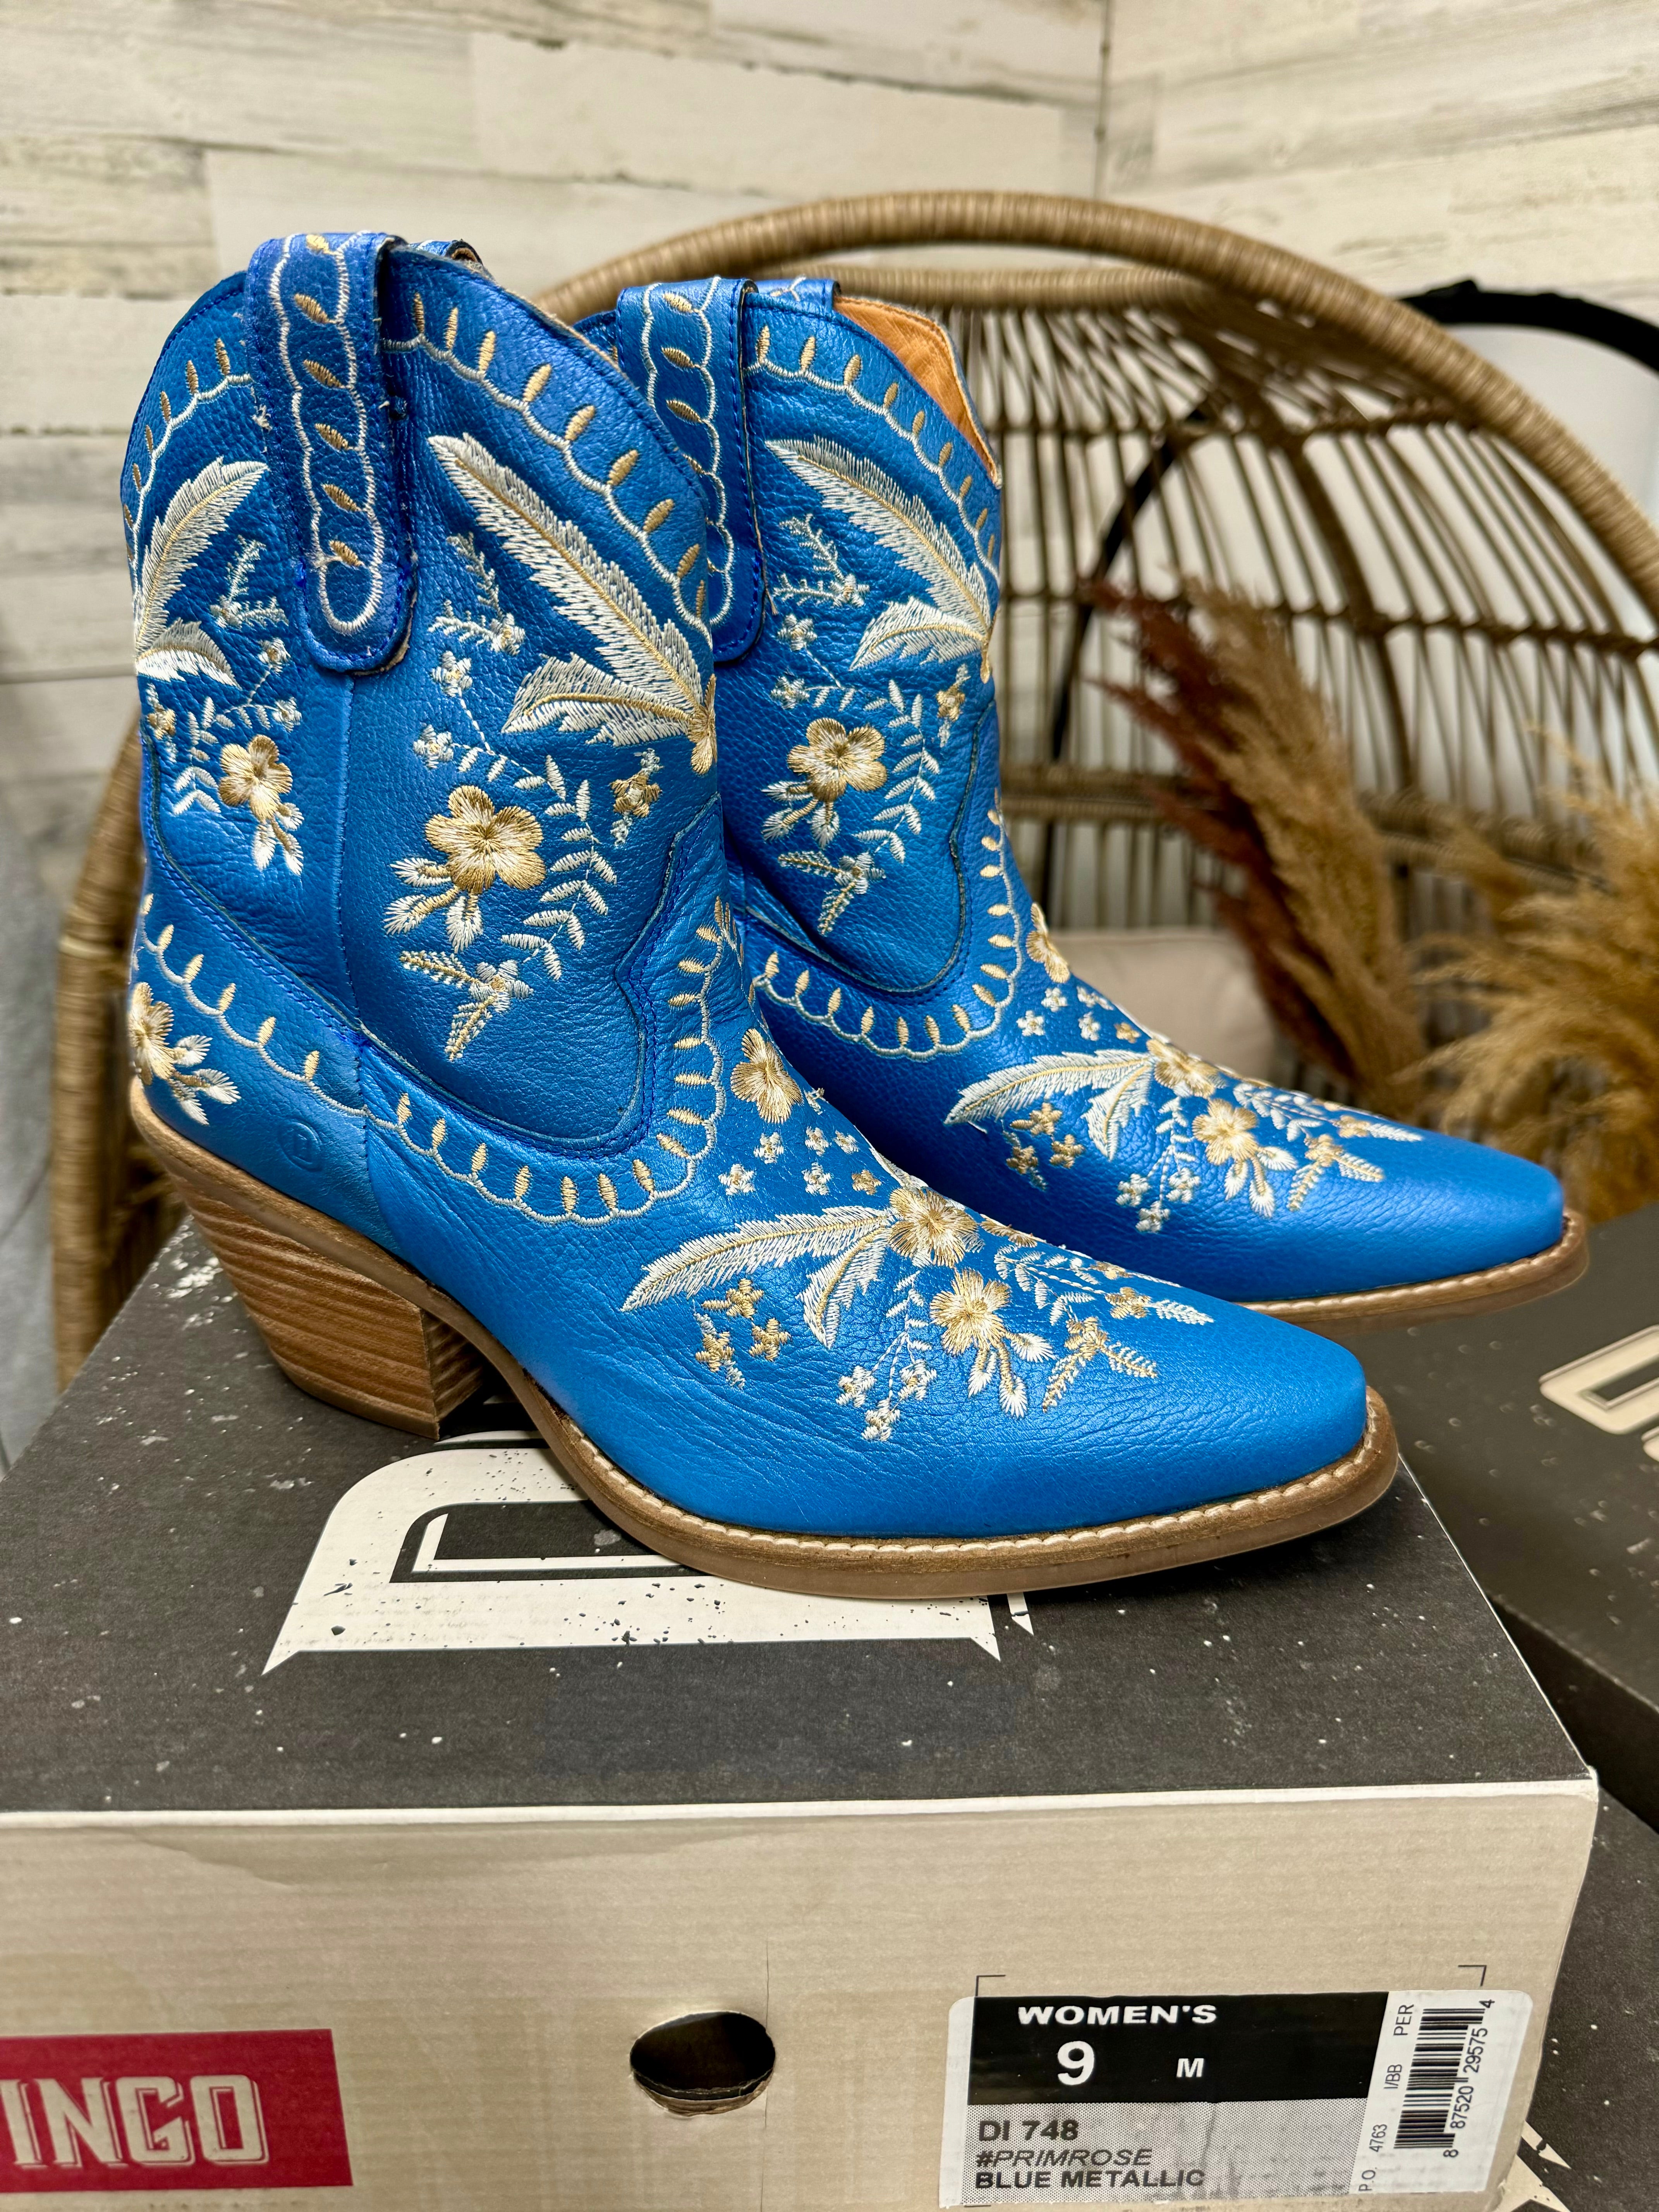 Last Chance Size 9 | Dingo | Primrose Leather Floral Stitch Bootie in Blue Metallic DISCONTINUED - Giddy Up Glamour Boutique